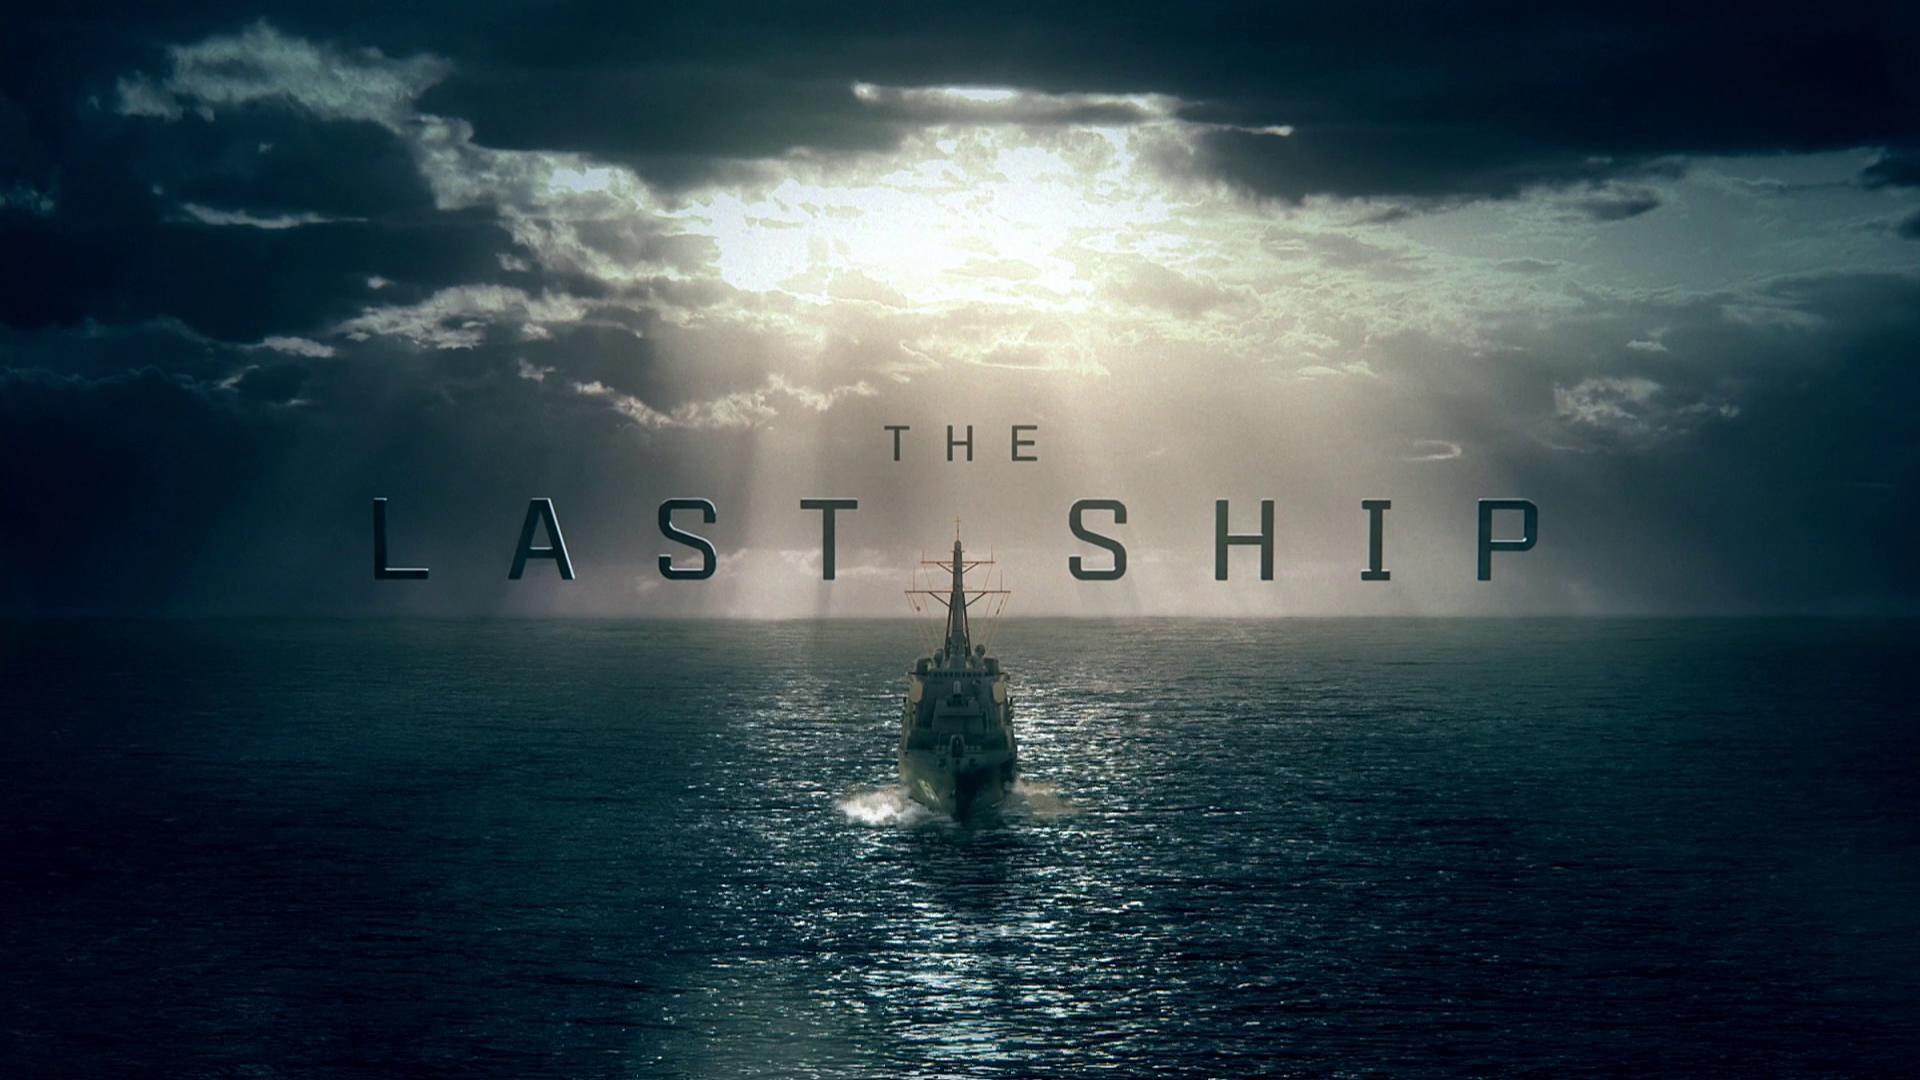 Watch The Last Ship Online at Hulu